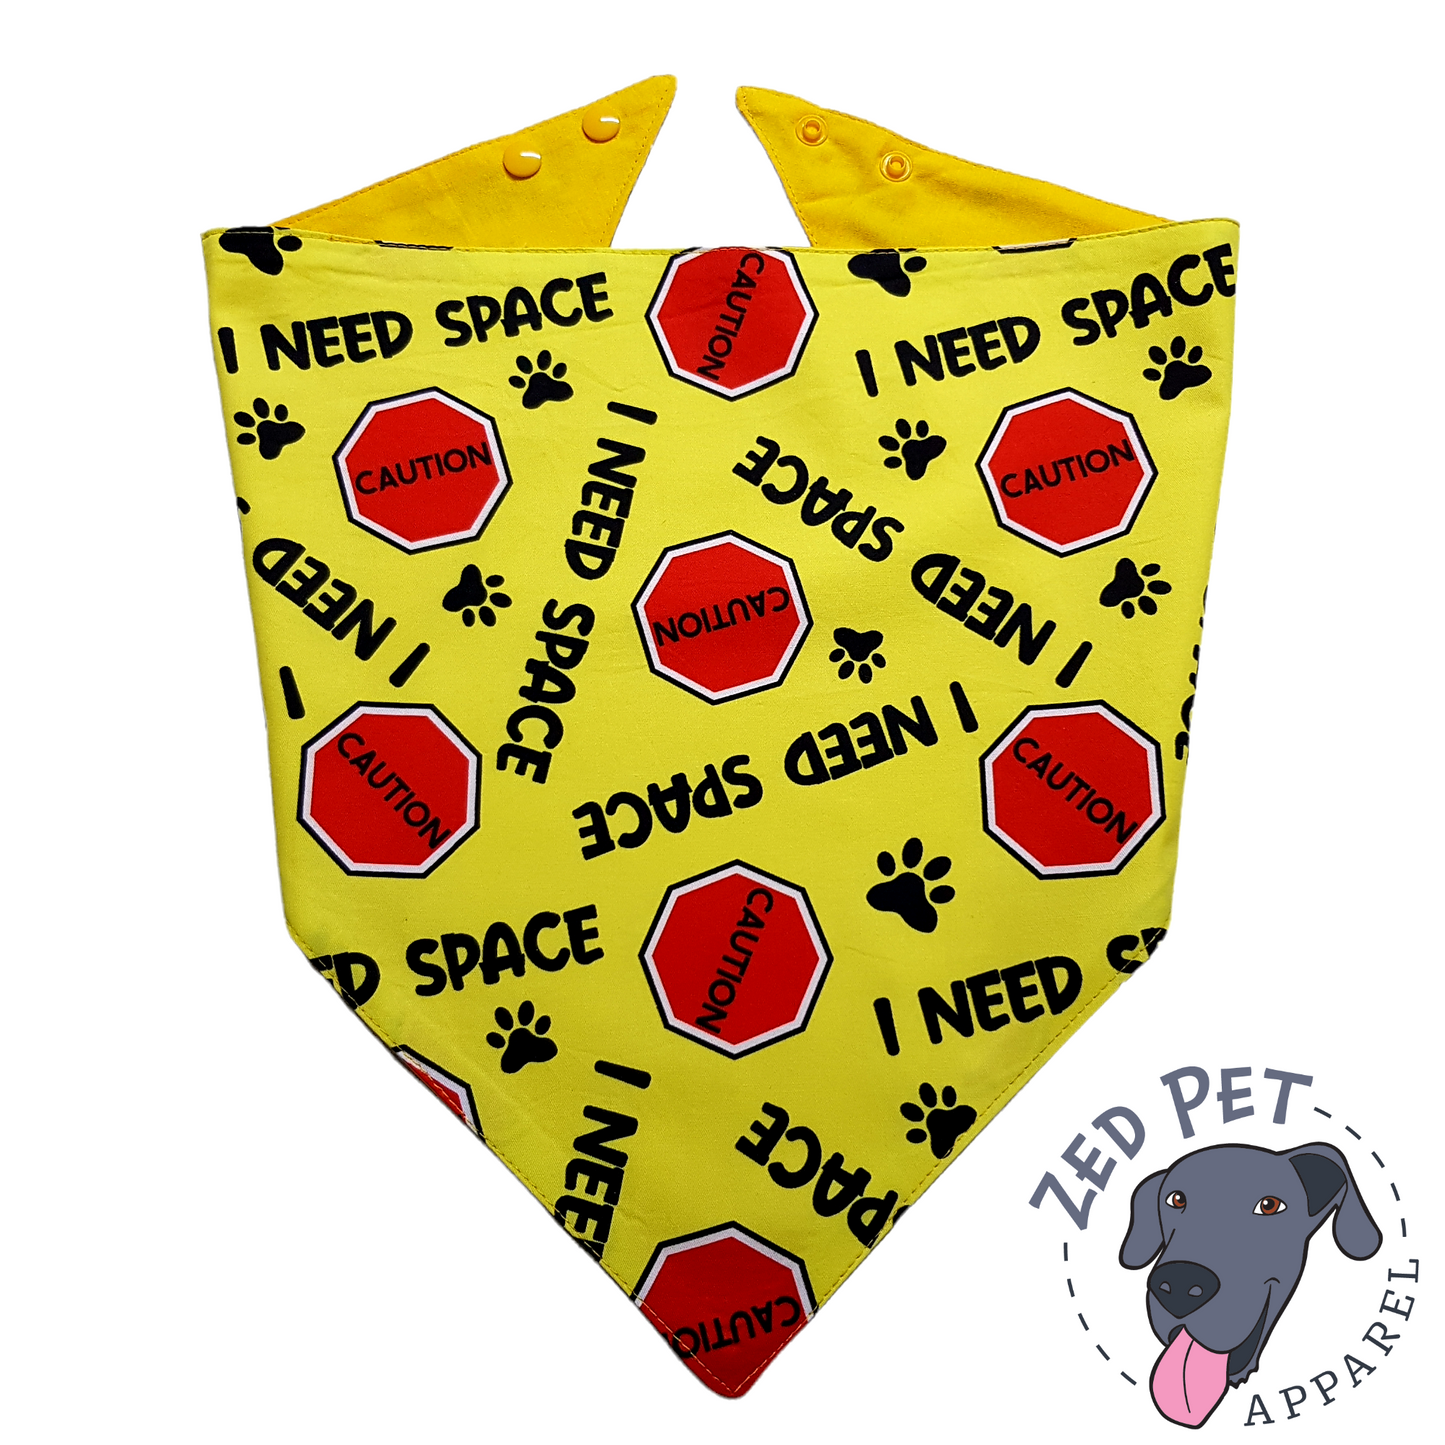 yellow dog bandanna that says "caution I need space"